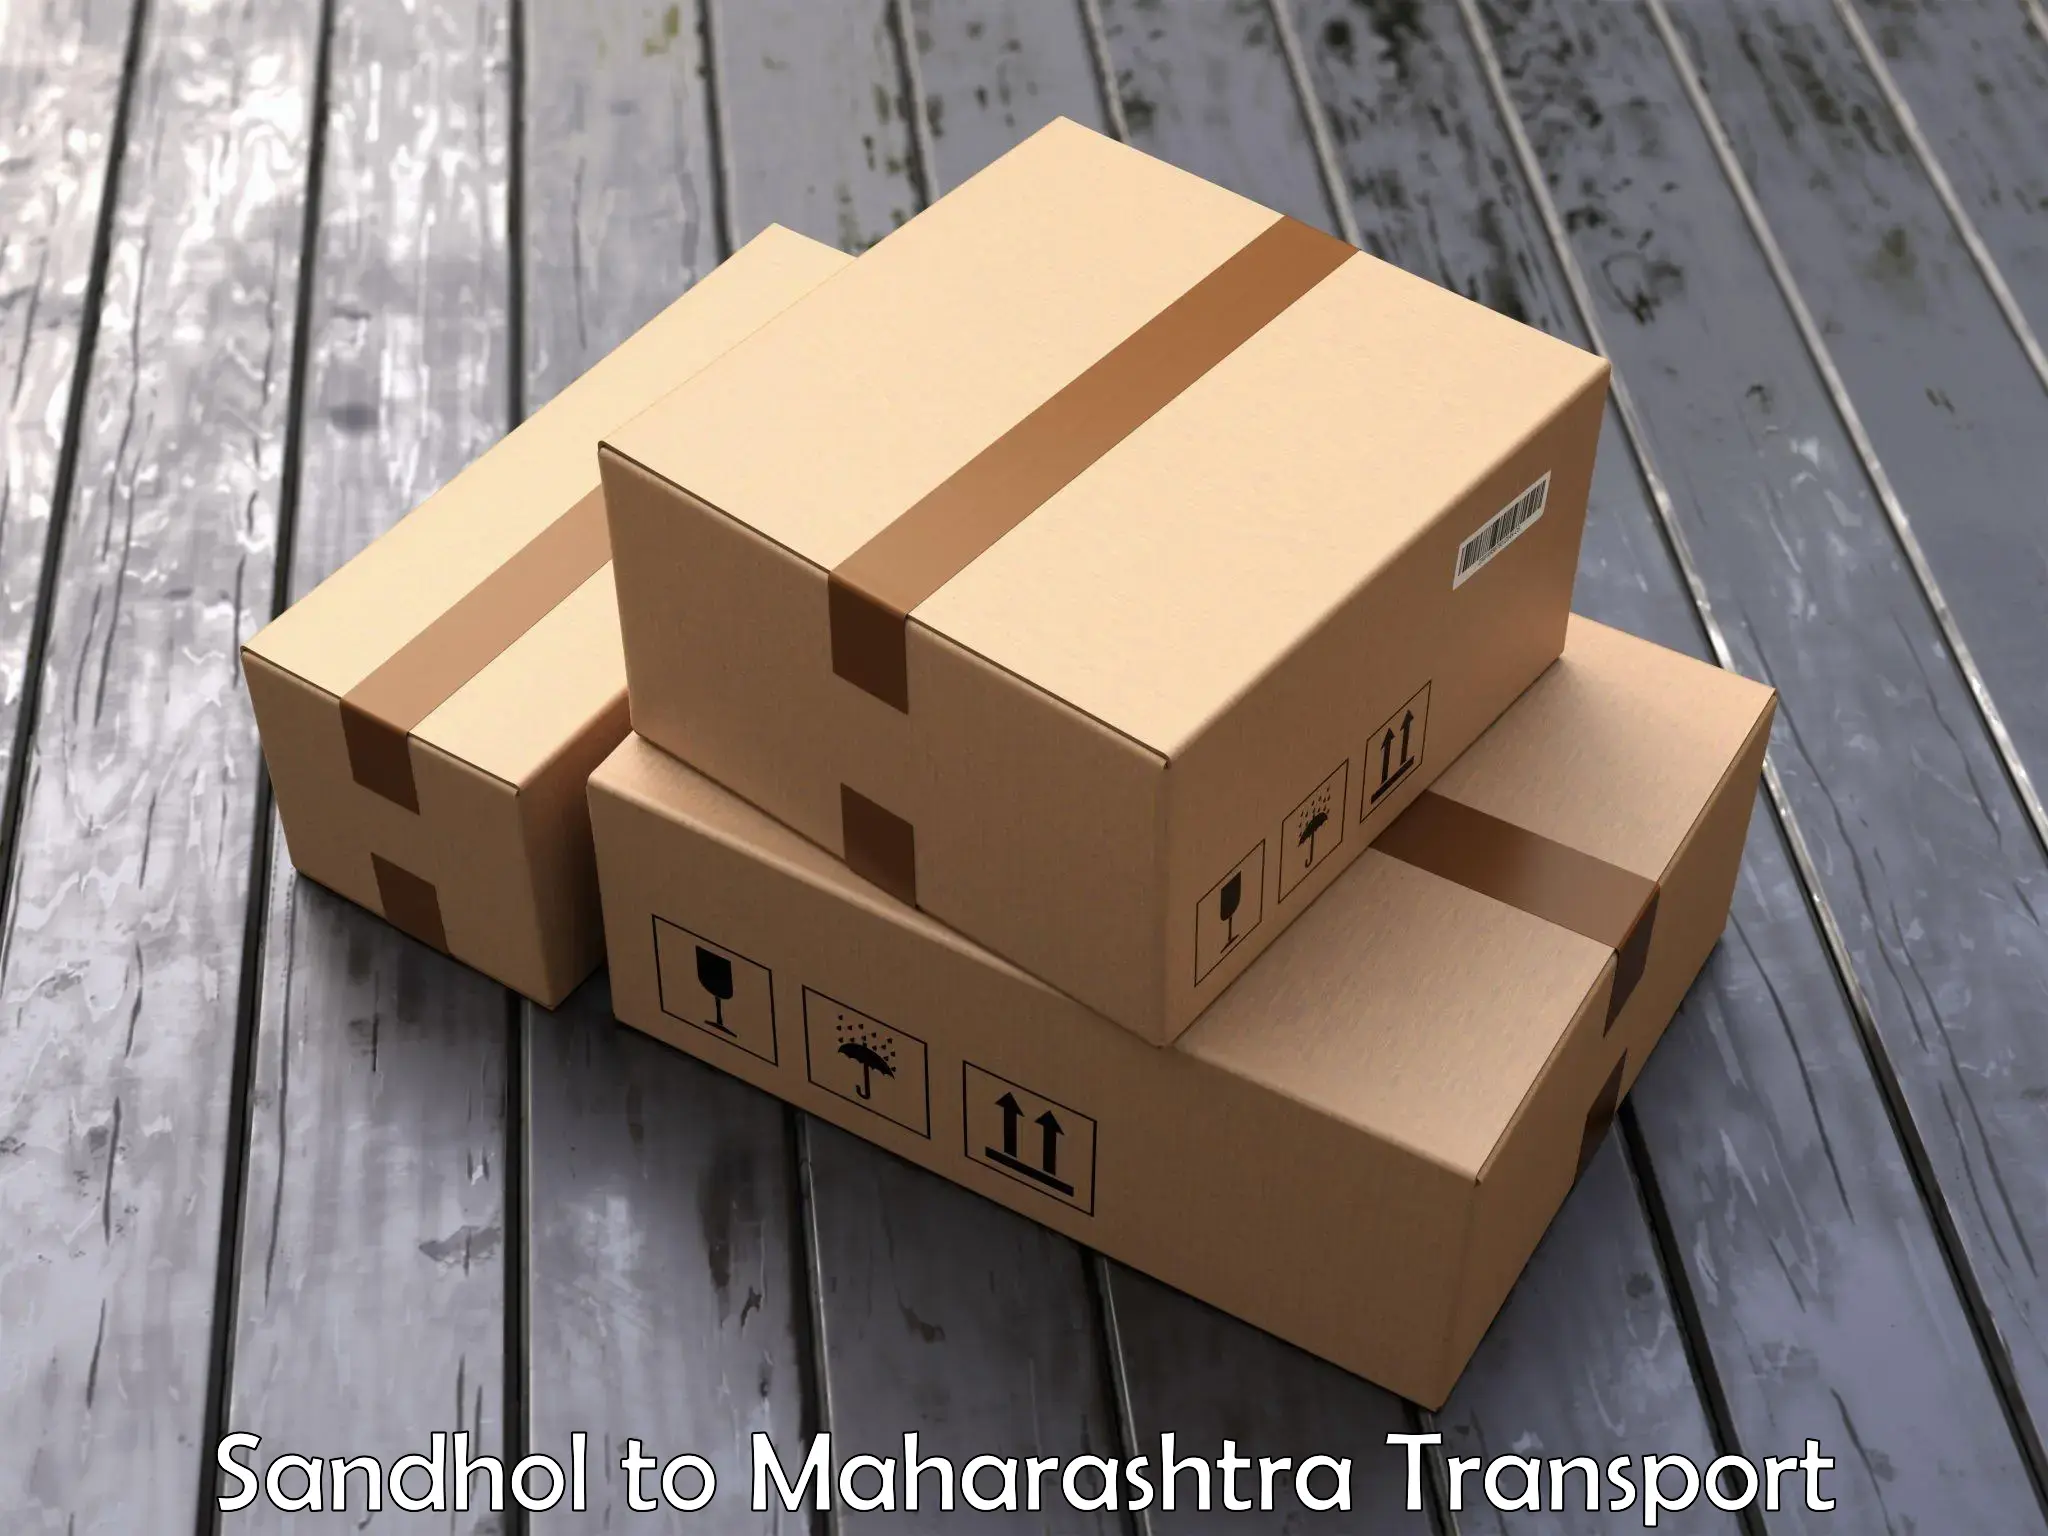 Truck transport companies in India Sandhol to Loha Nanded